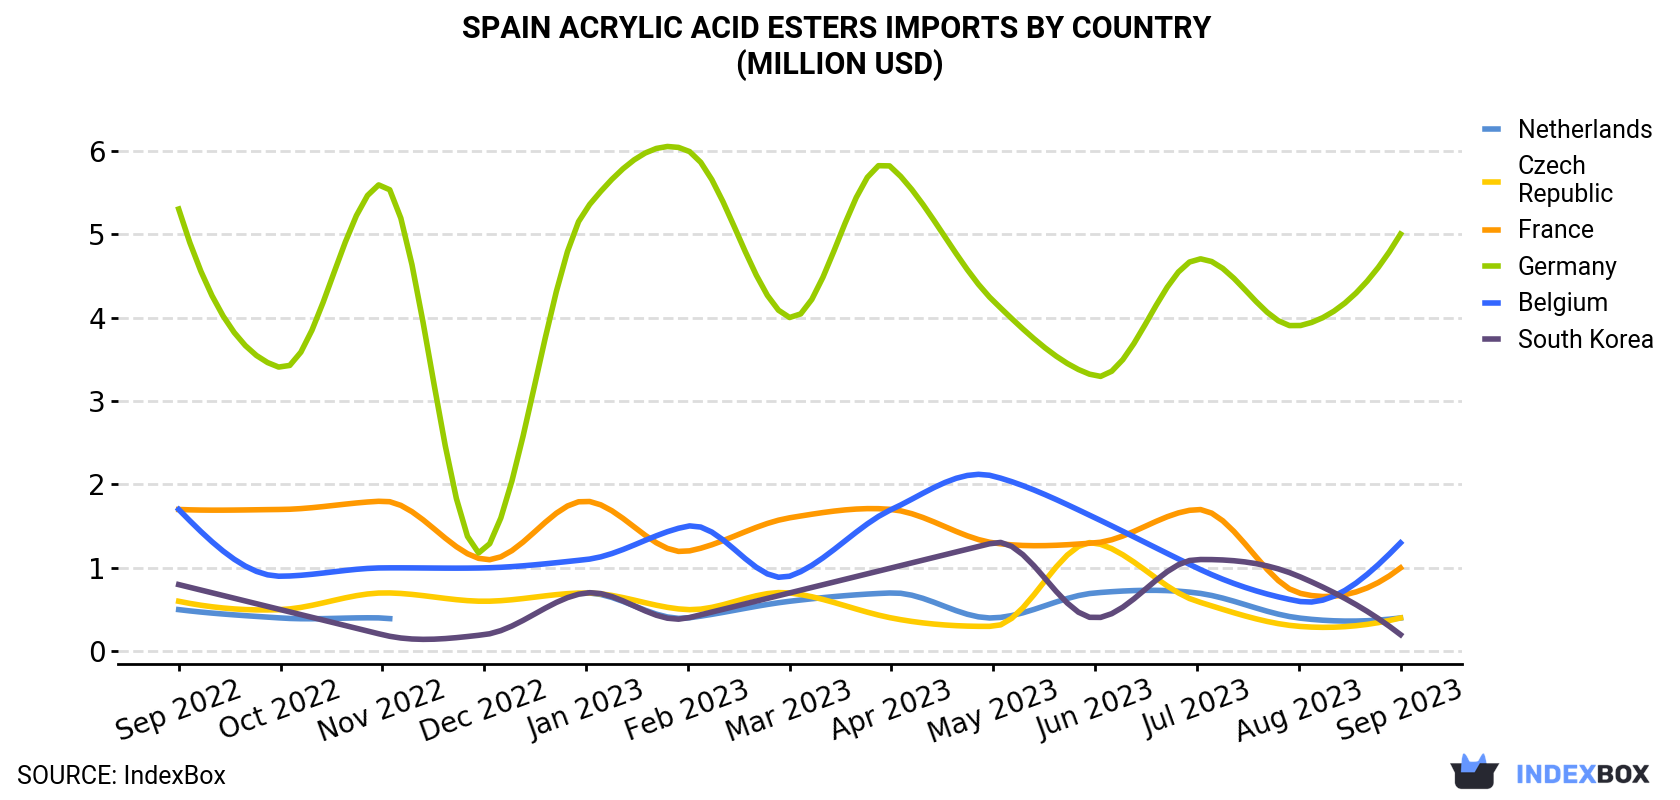 Spain Acrylic Acid Esters Imports By Country (Million USD)